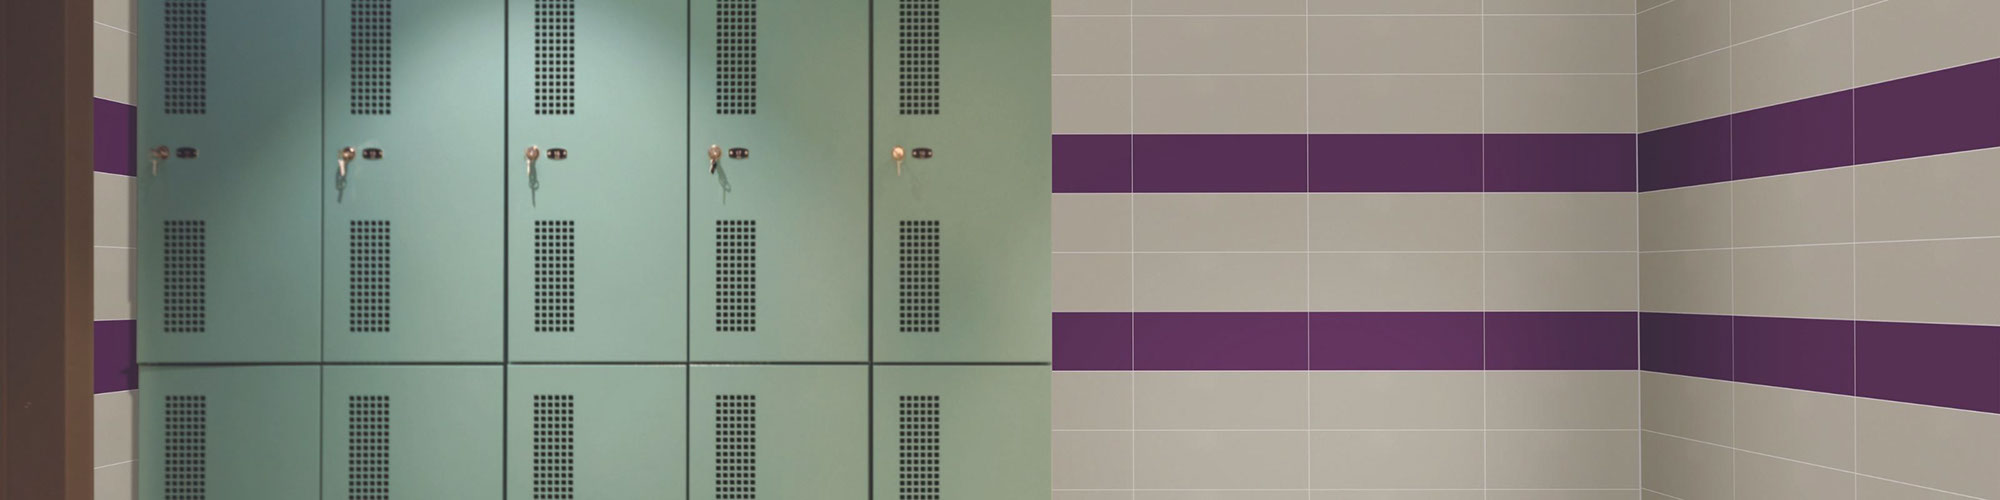 Locker room with beige wall tile with 2 purple horizontal stripes and mint green lockers.